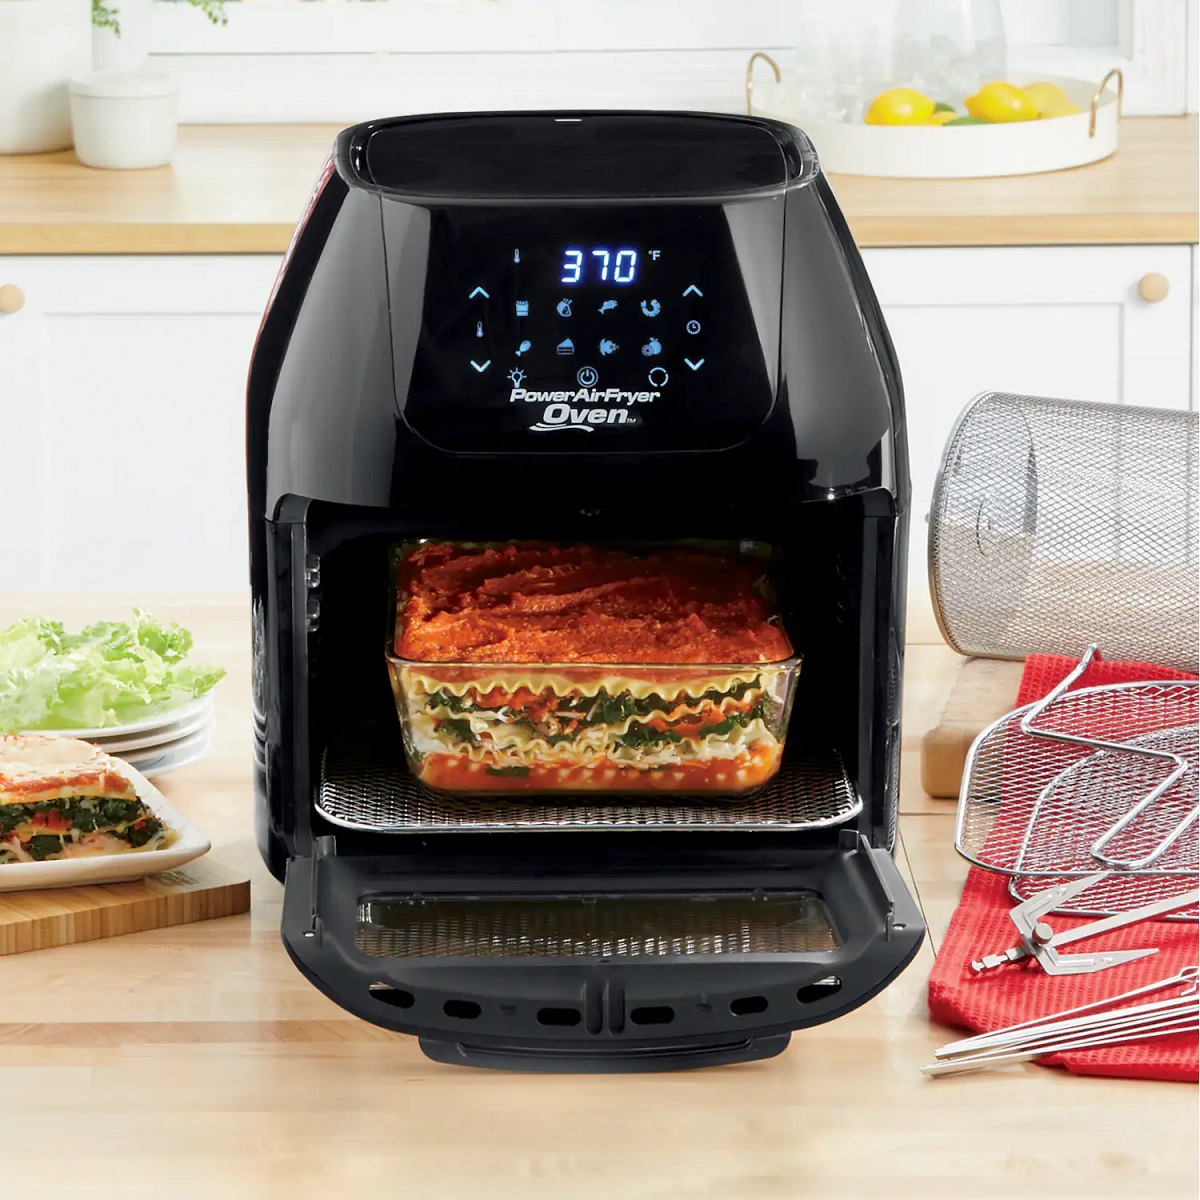 https://storables.com/wp-content/uploads/2023/07/9-amazing-power-air-fryer-oven-as-seen-on-tv-for-2023-1690381517.jpg